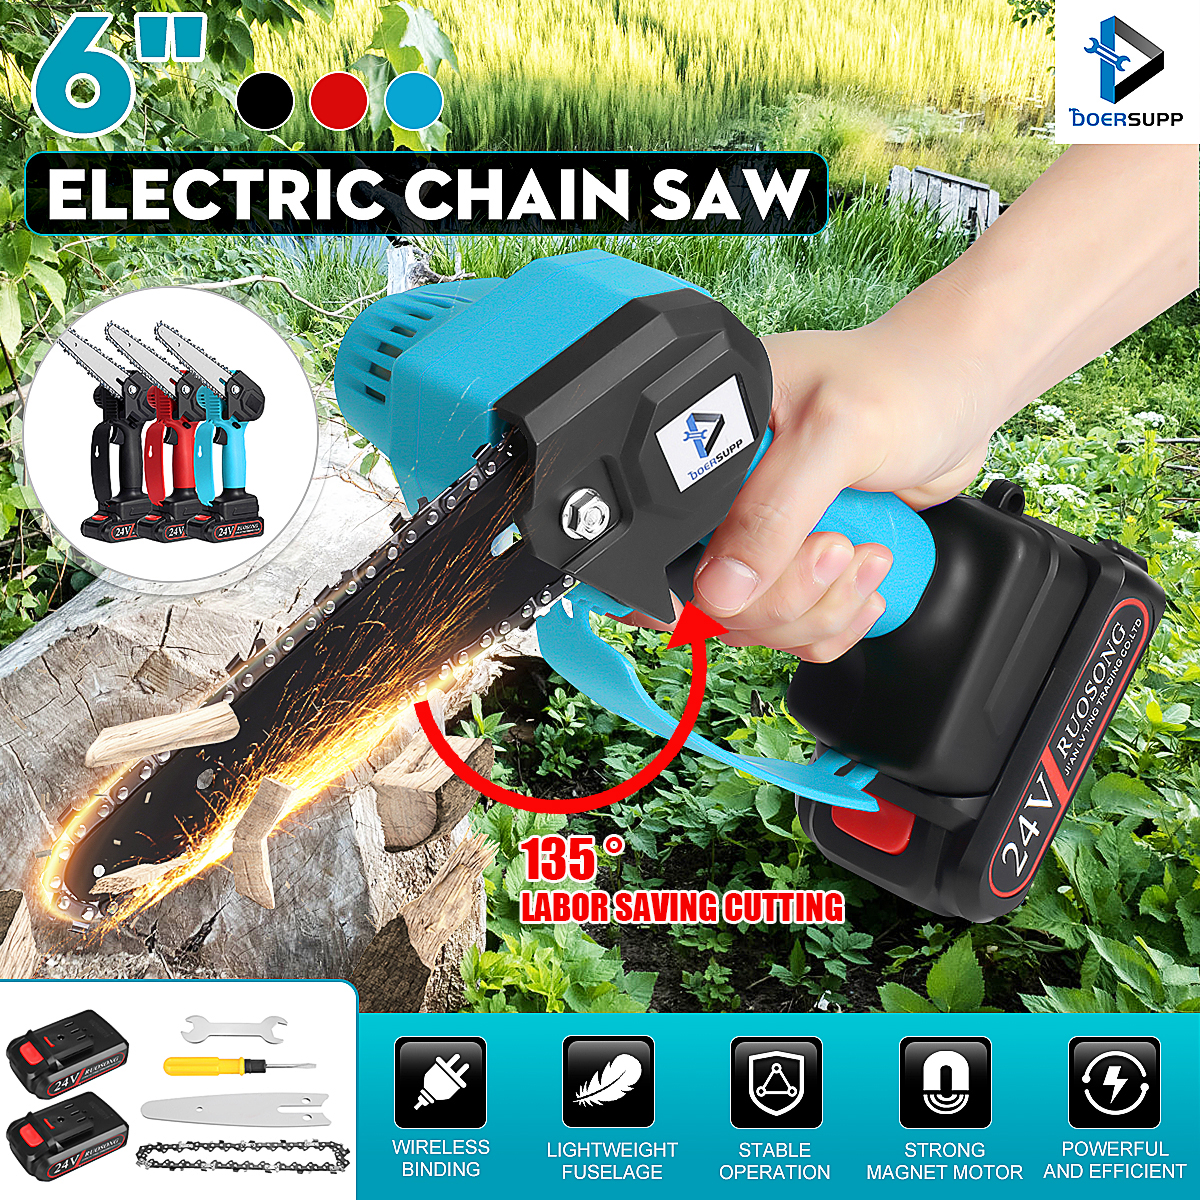 1500W-6Inch-Cordless-Electric-Chain-Saw-Wood-Mini-Cutter-One-Hand-Saw-Woodworking-Tool-W-2pcs-Batter-1833878-2